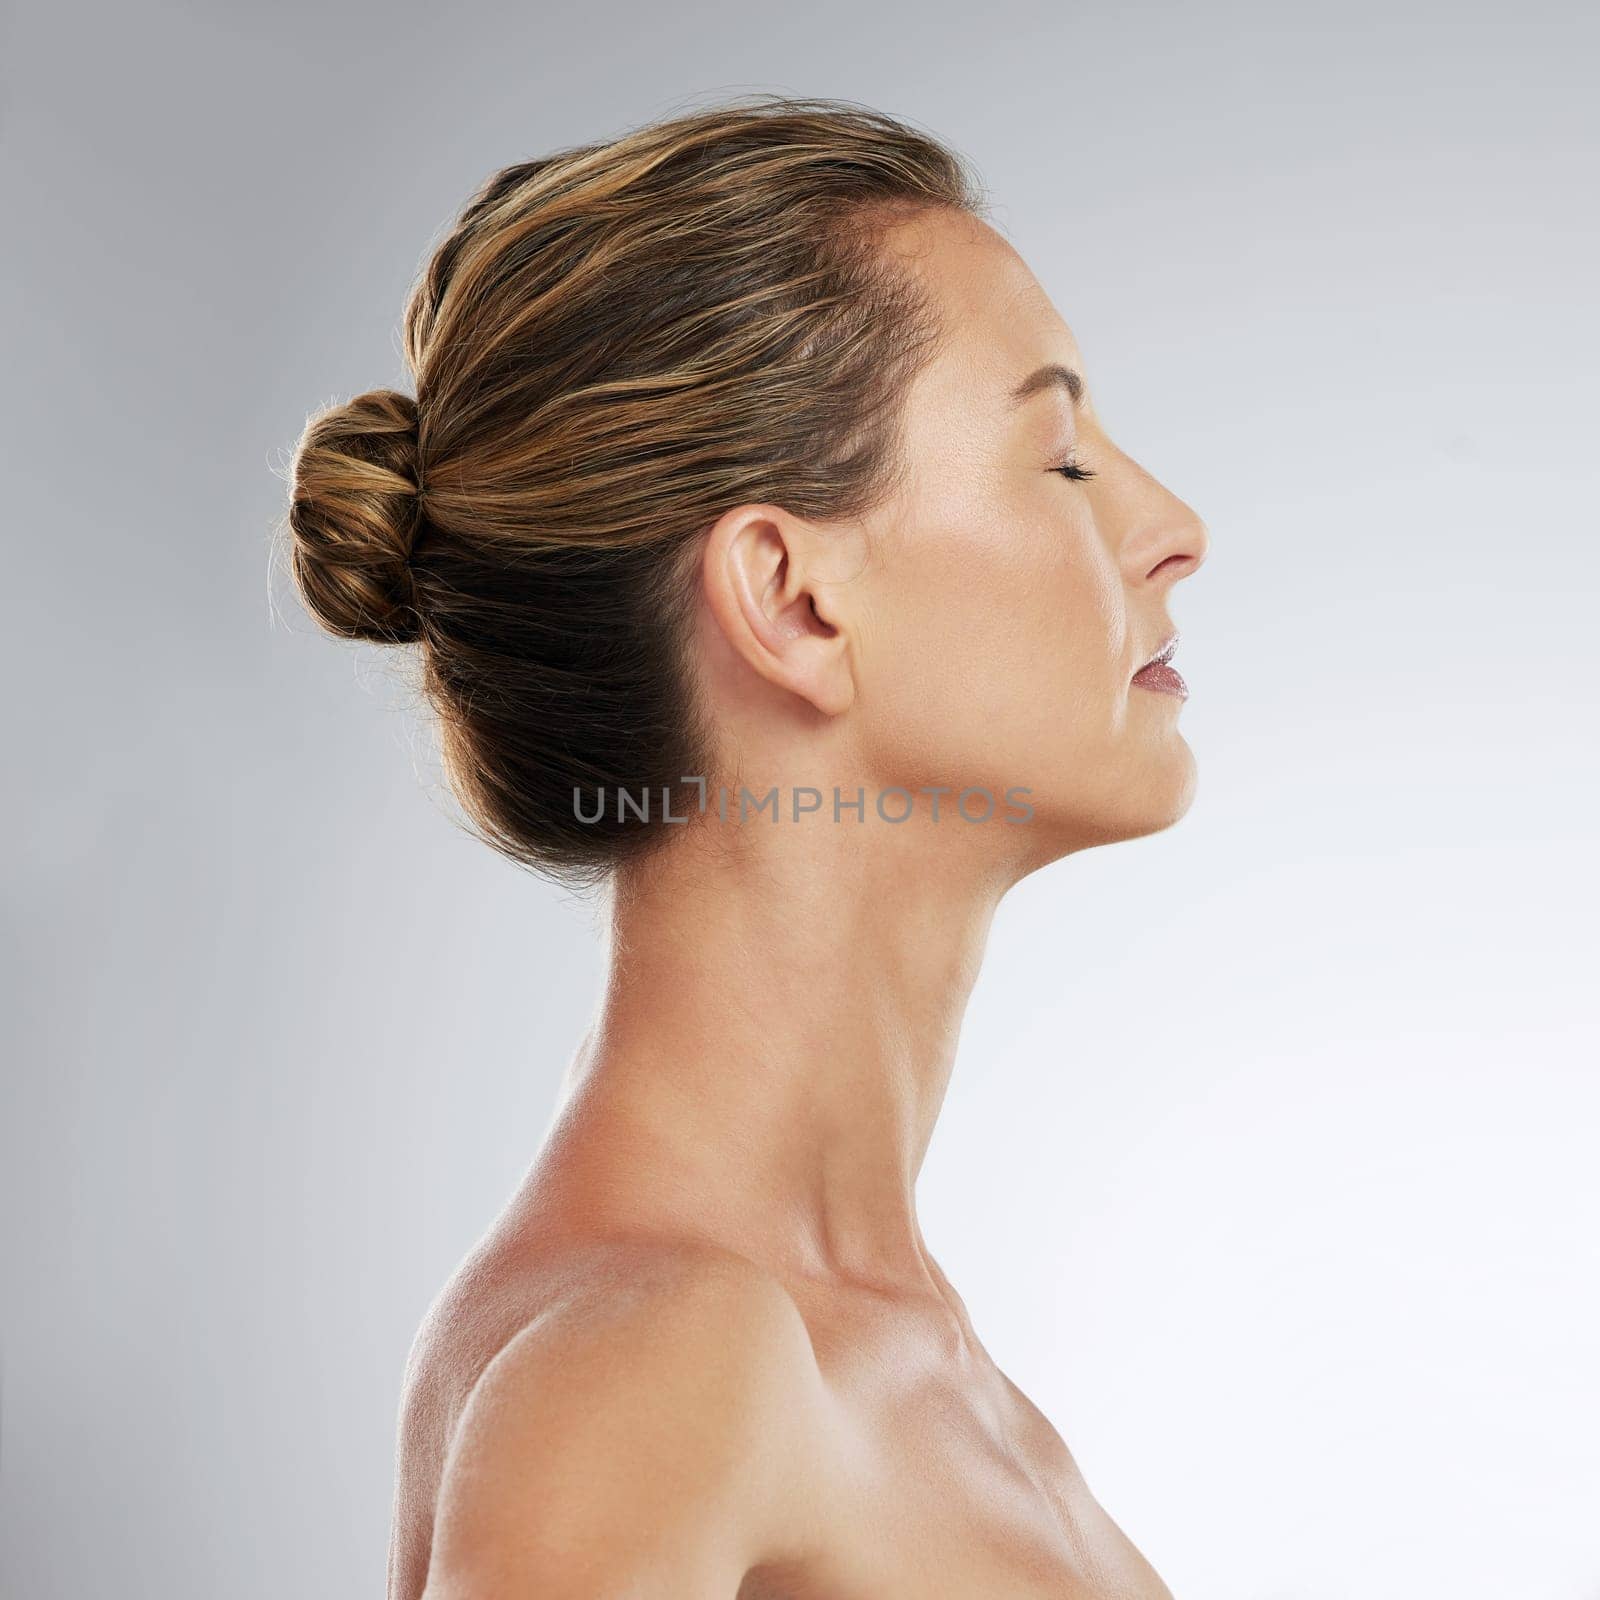 Skincare, beauty and profile of mature woman in studio with a healthy face, skin and face routine. Facial, cosmetic and model with wellness, health and self care lifestyle standing by gray background.